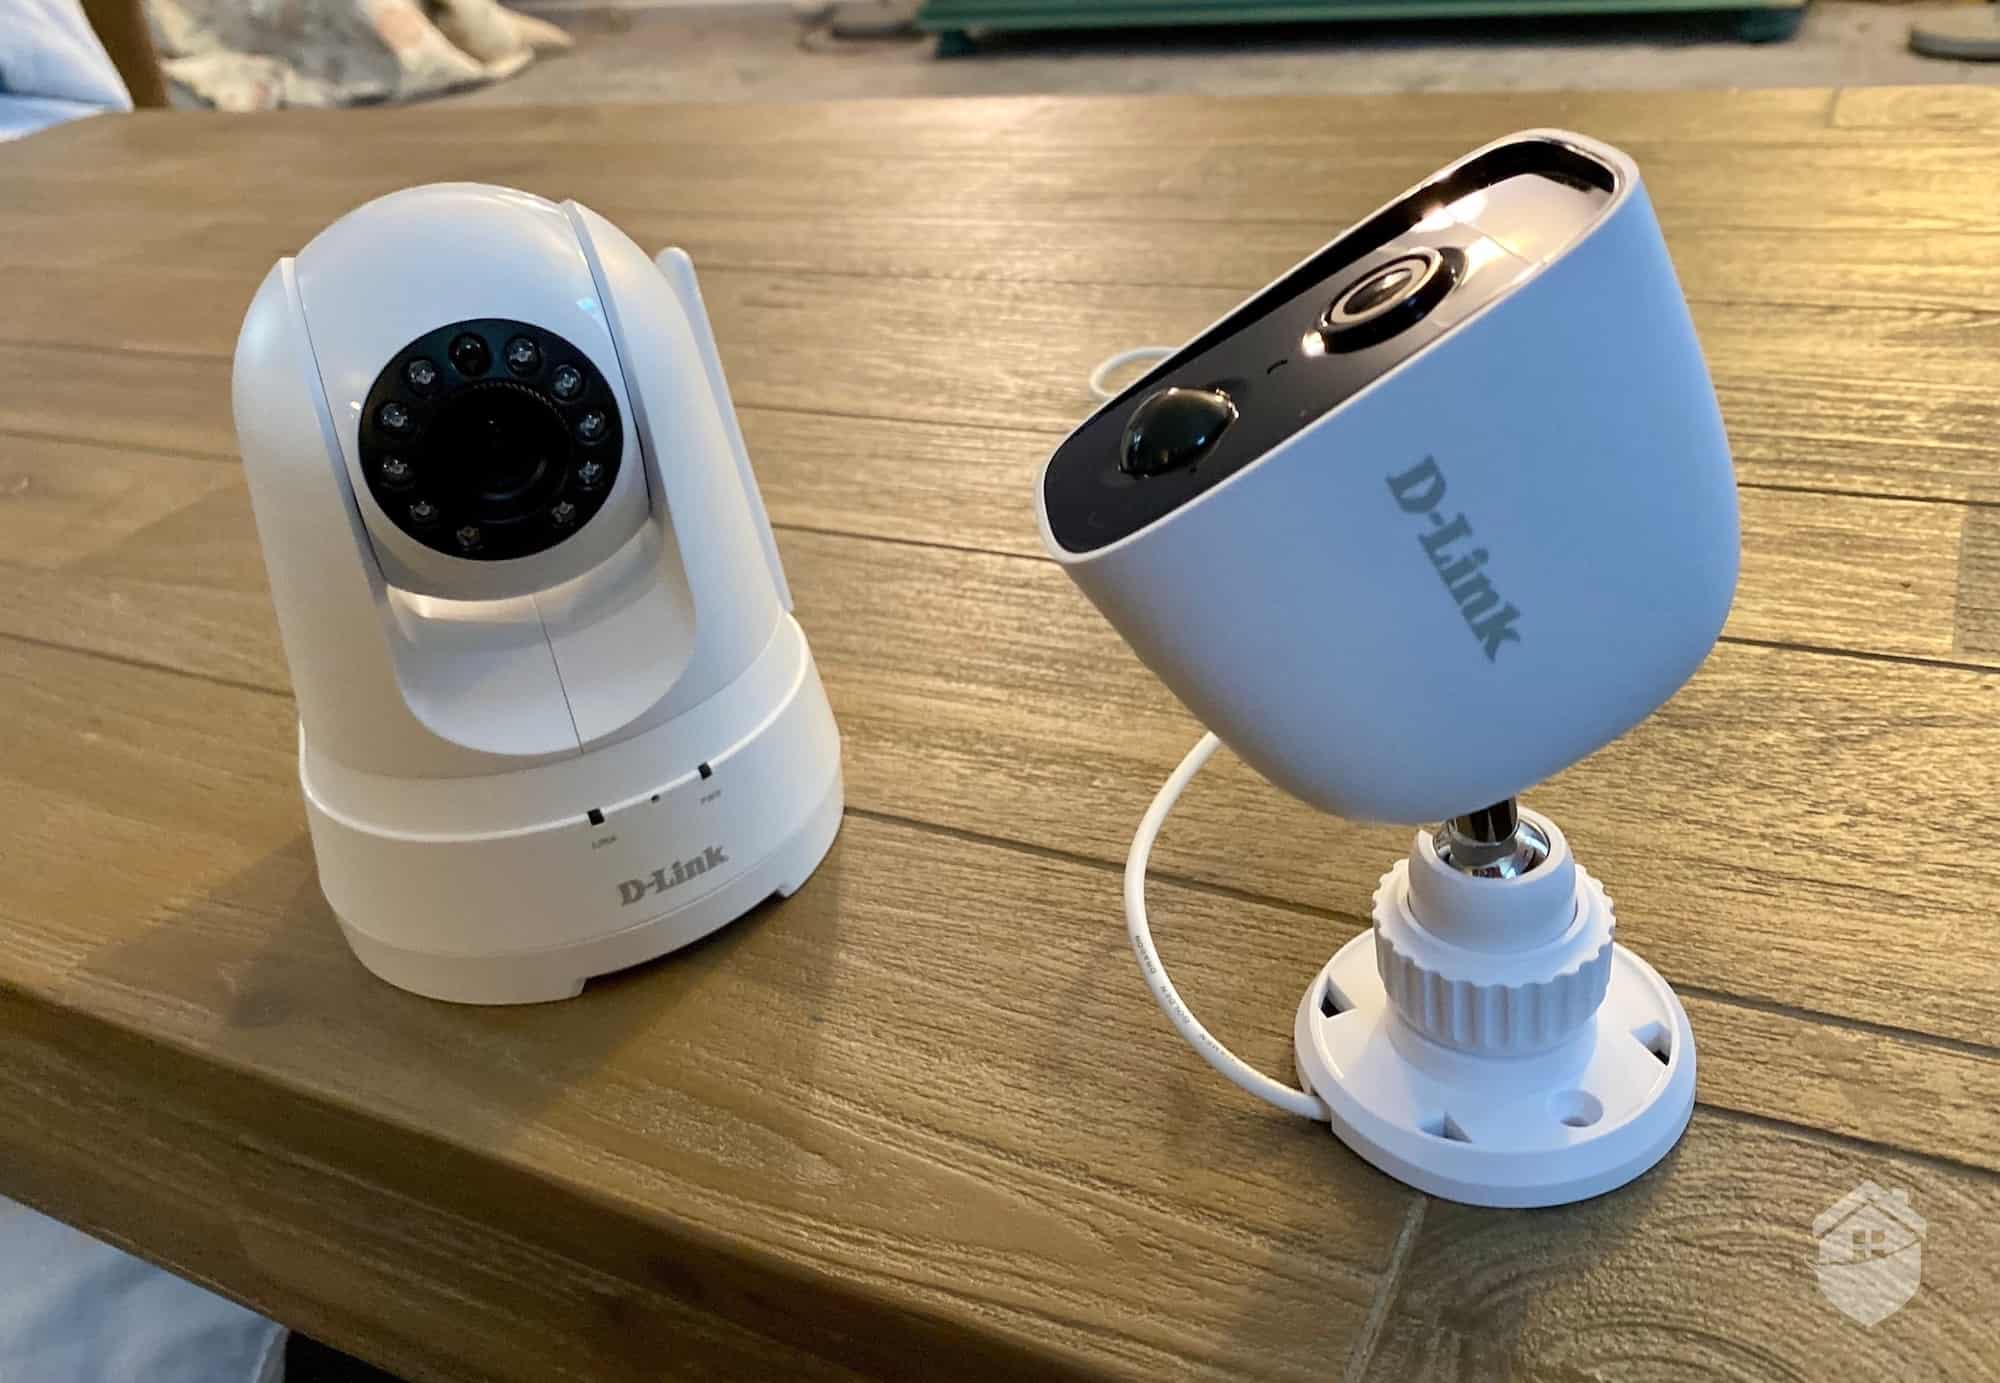 Millimeter Onbemand Daar D-Link Security Camera Costs and Pricing in 2023